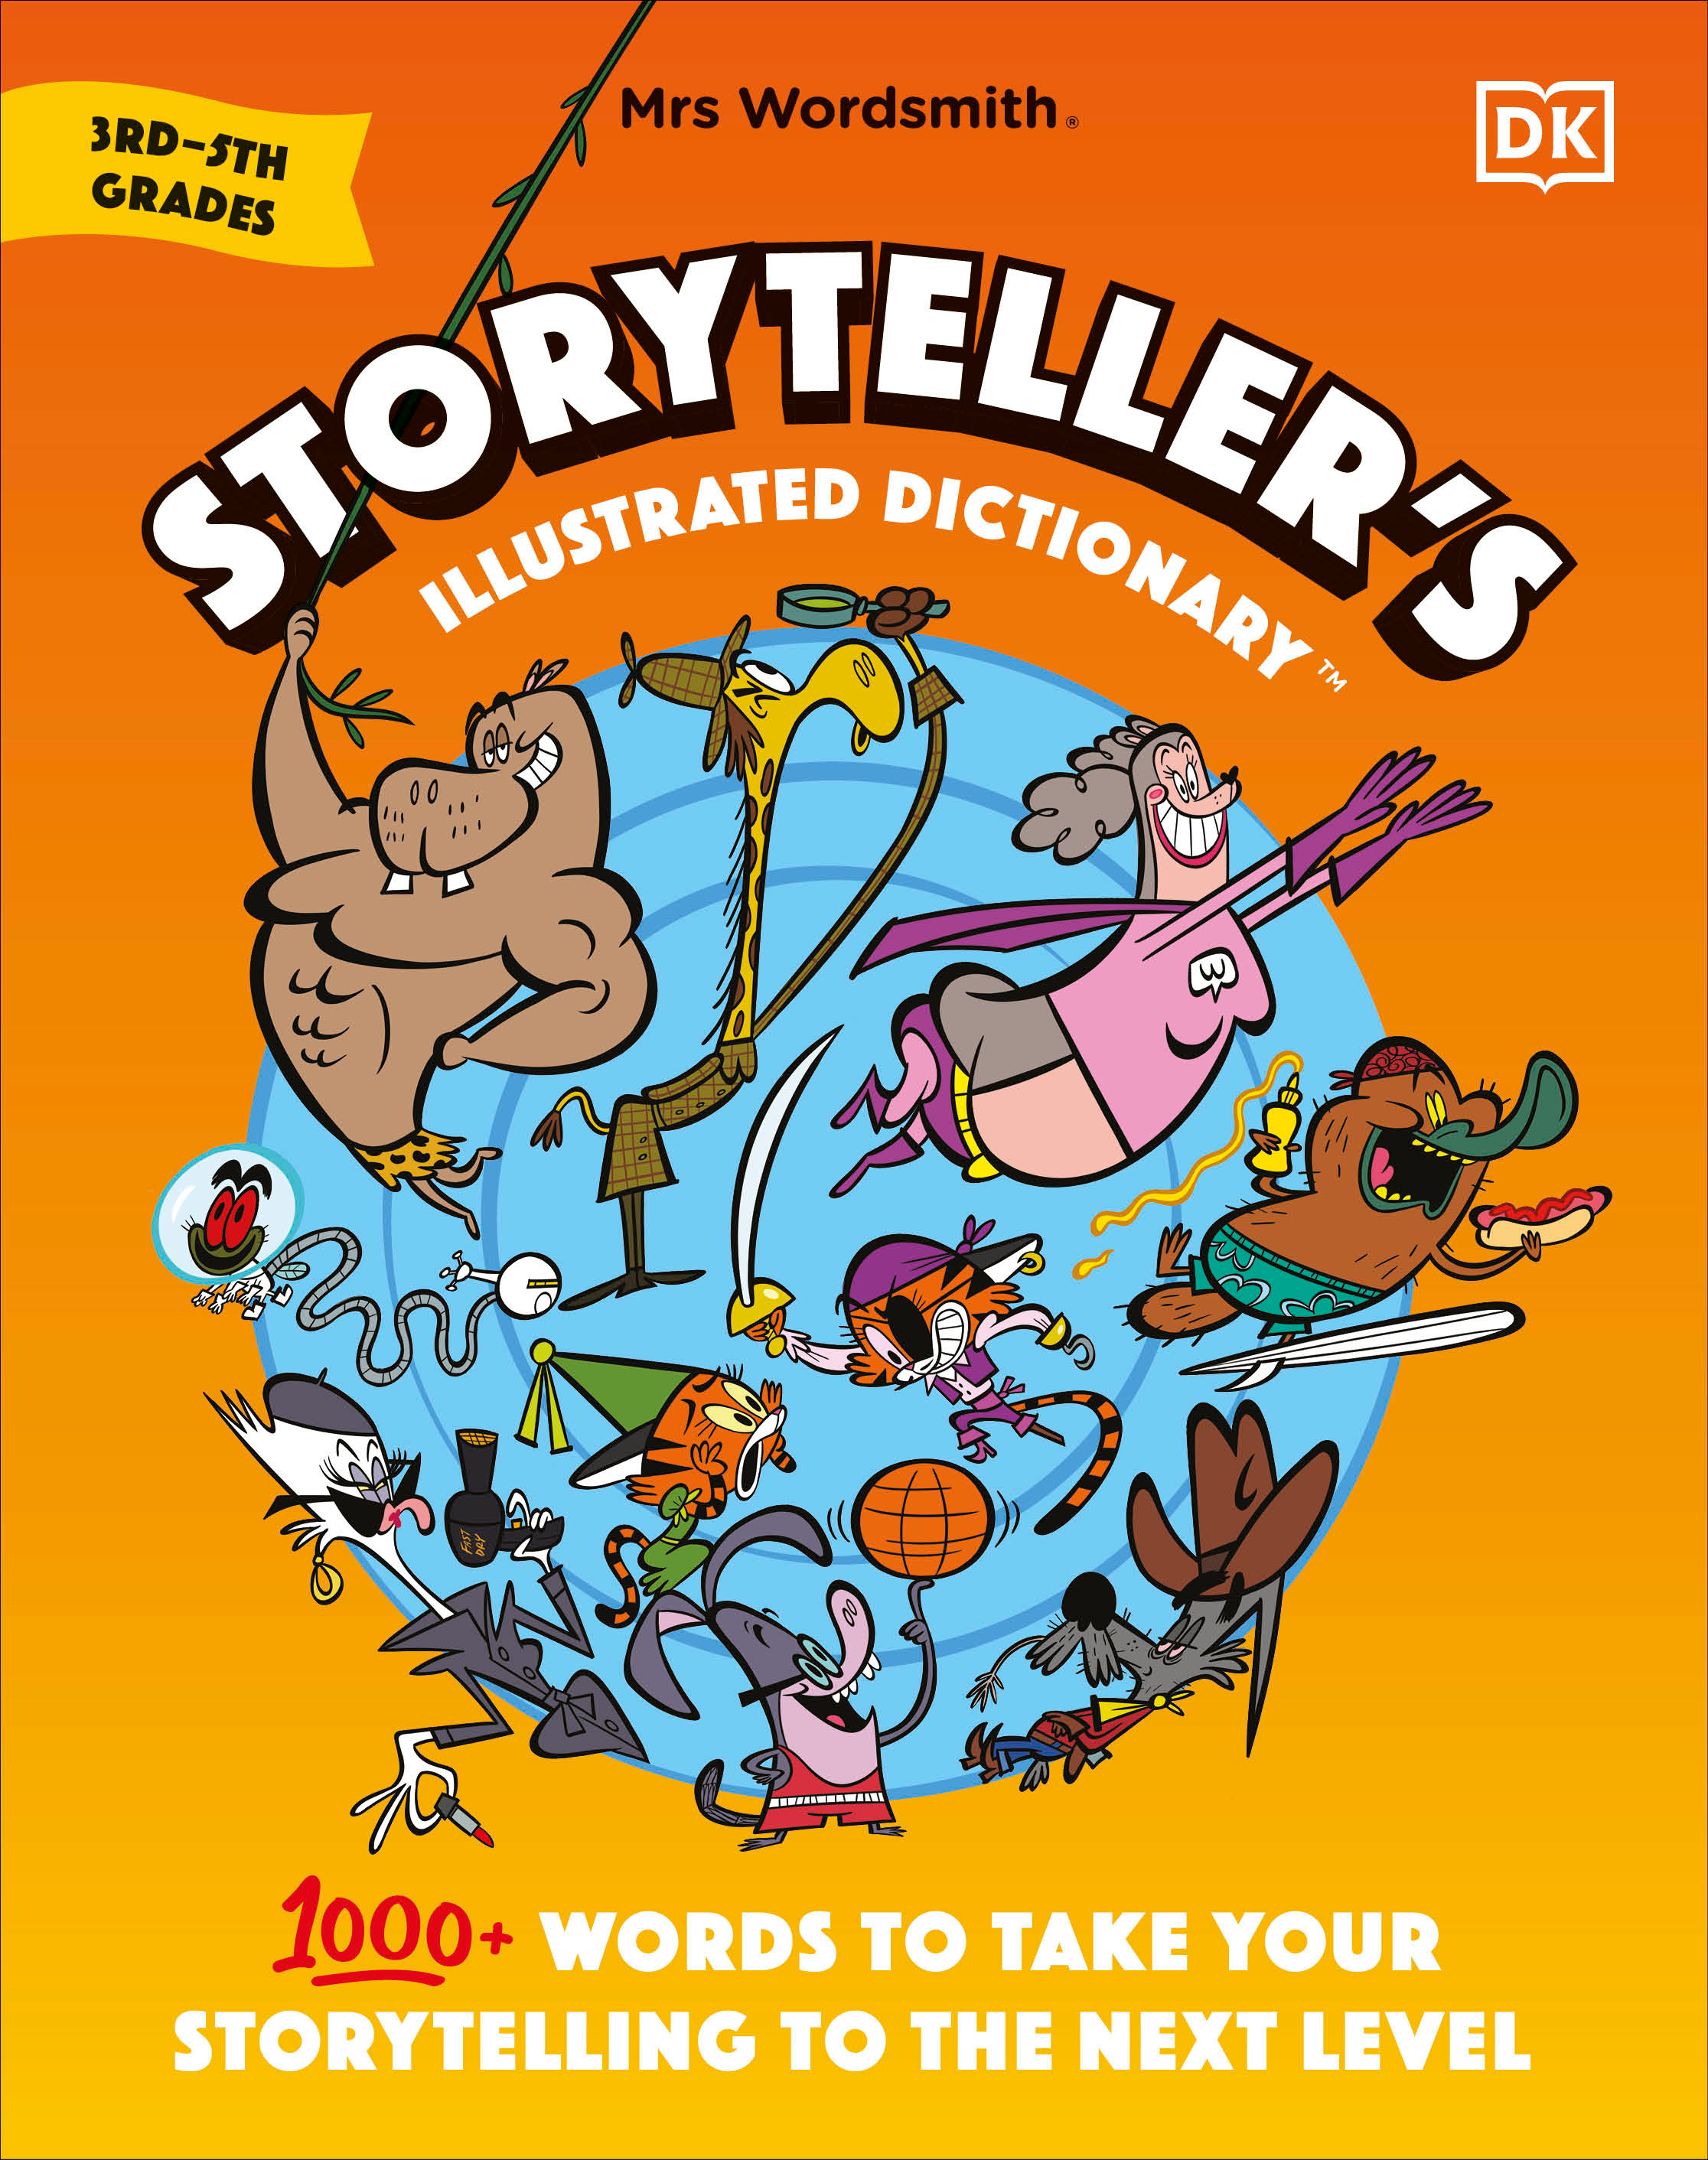 Mrs Wordsmith Storytellerâ€™s Illustrated Dictionary 3rd-5th Grades : 1000+ Words to Take Your Storytelling to the Next Level | Mrs Wordsmith